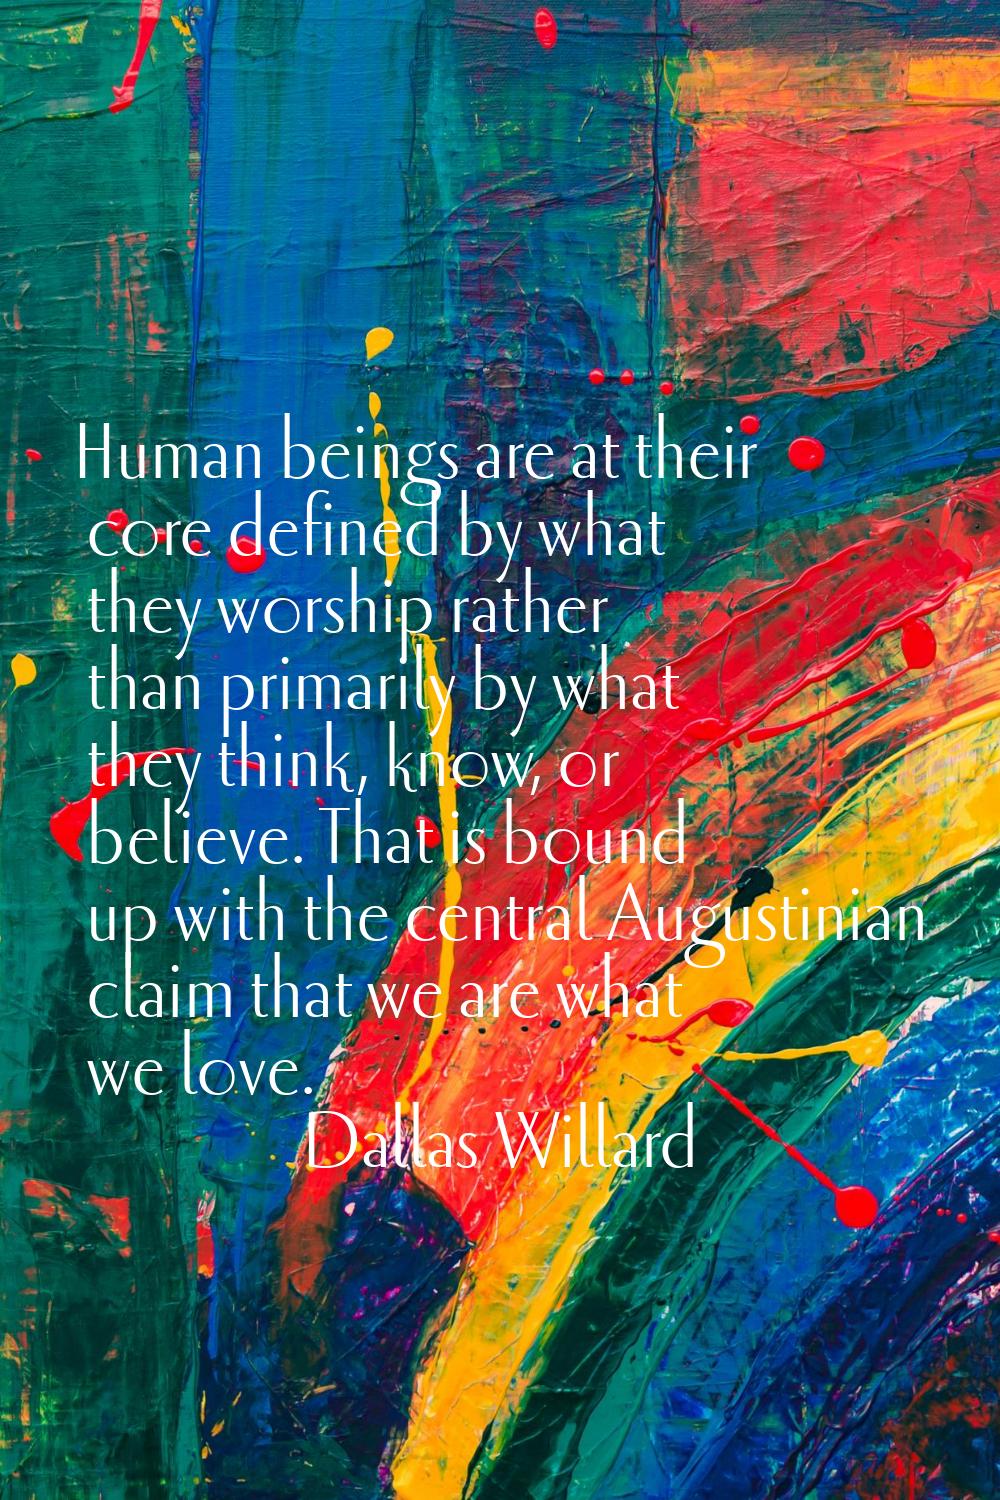 Human beings are at their core defined by what they worship rather than primarily by what they thin